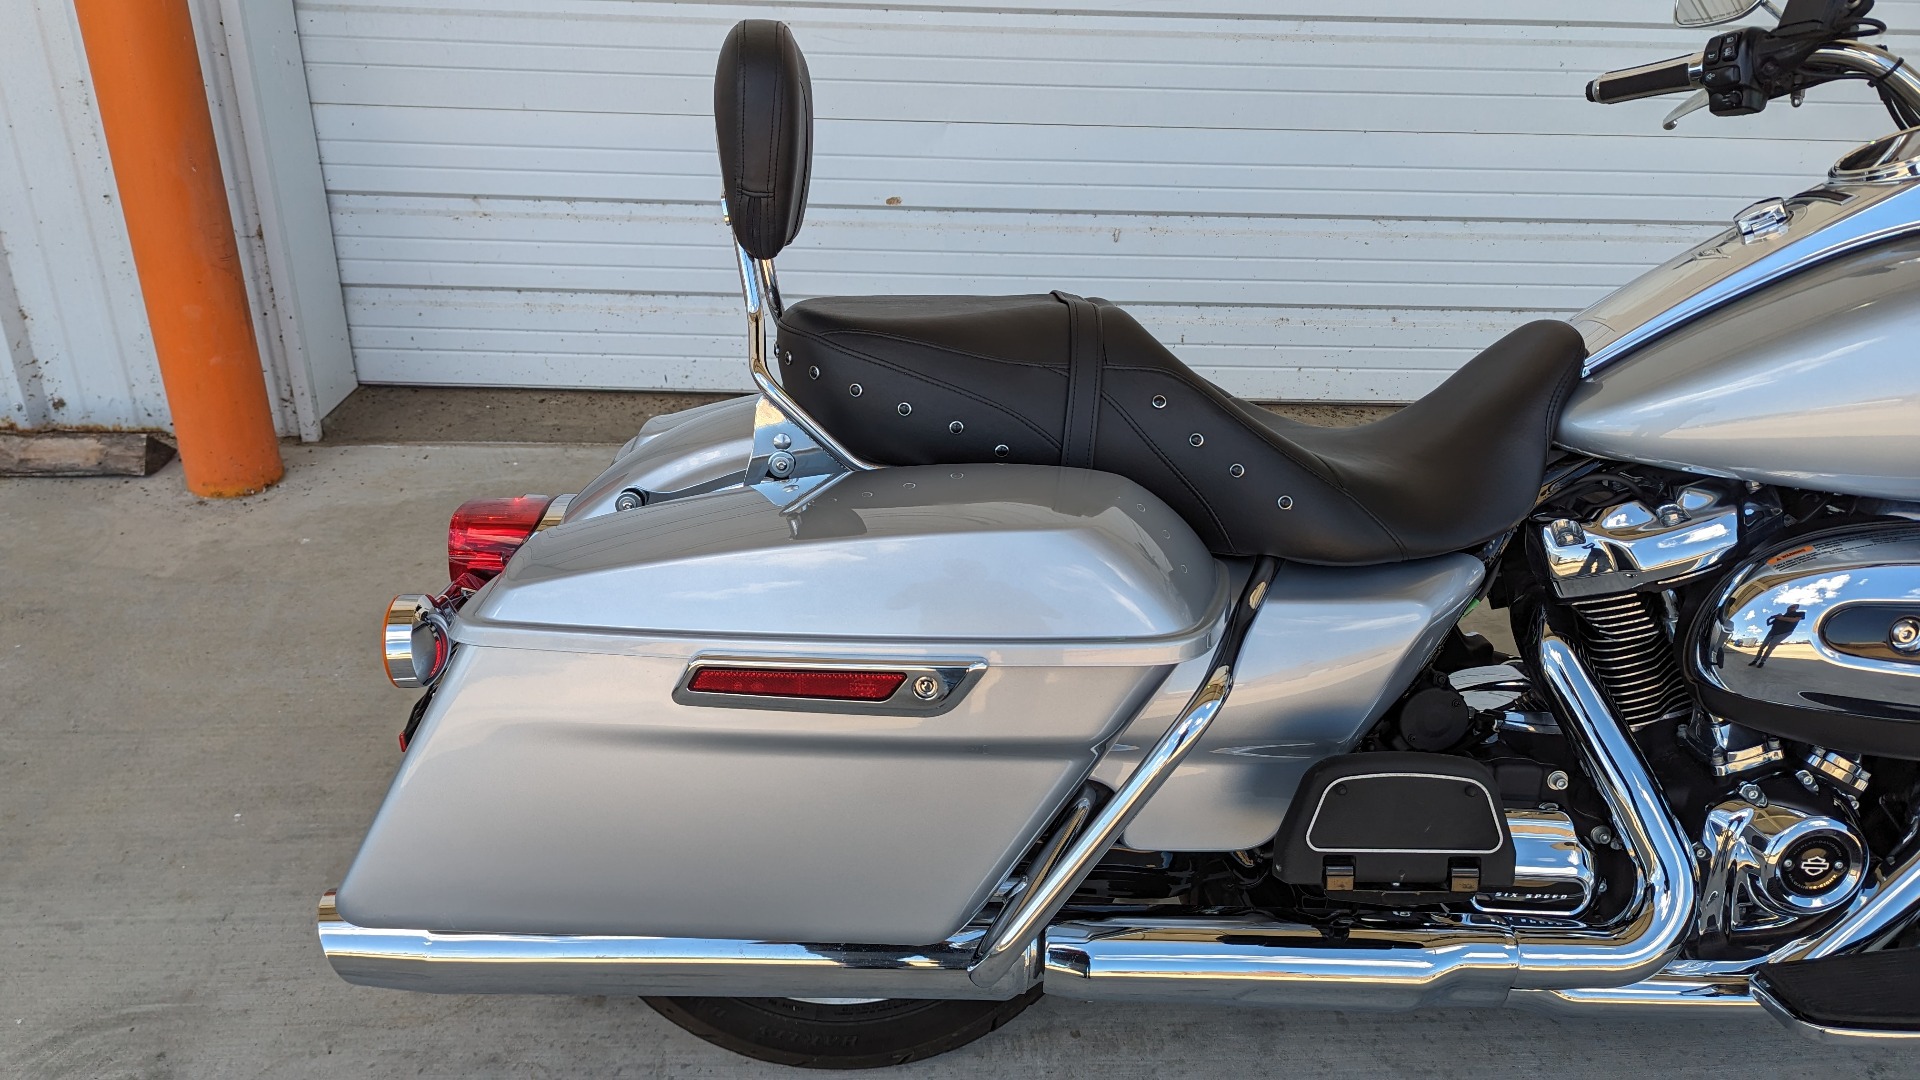 2019 harley davidson road king for sale in texas - Photo 5